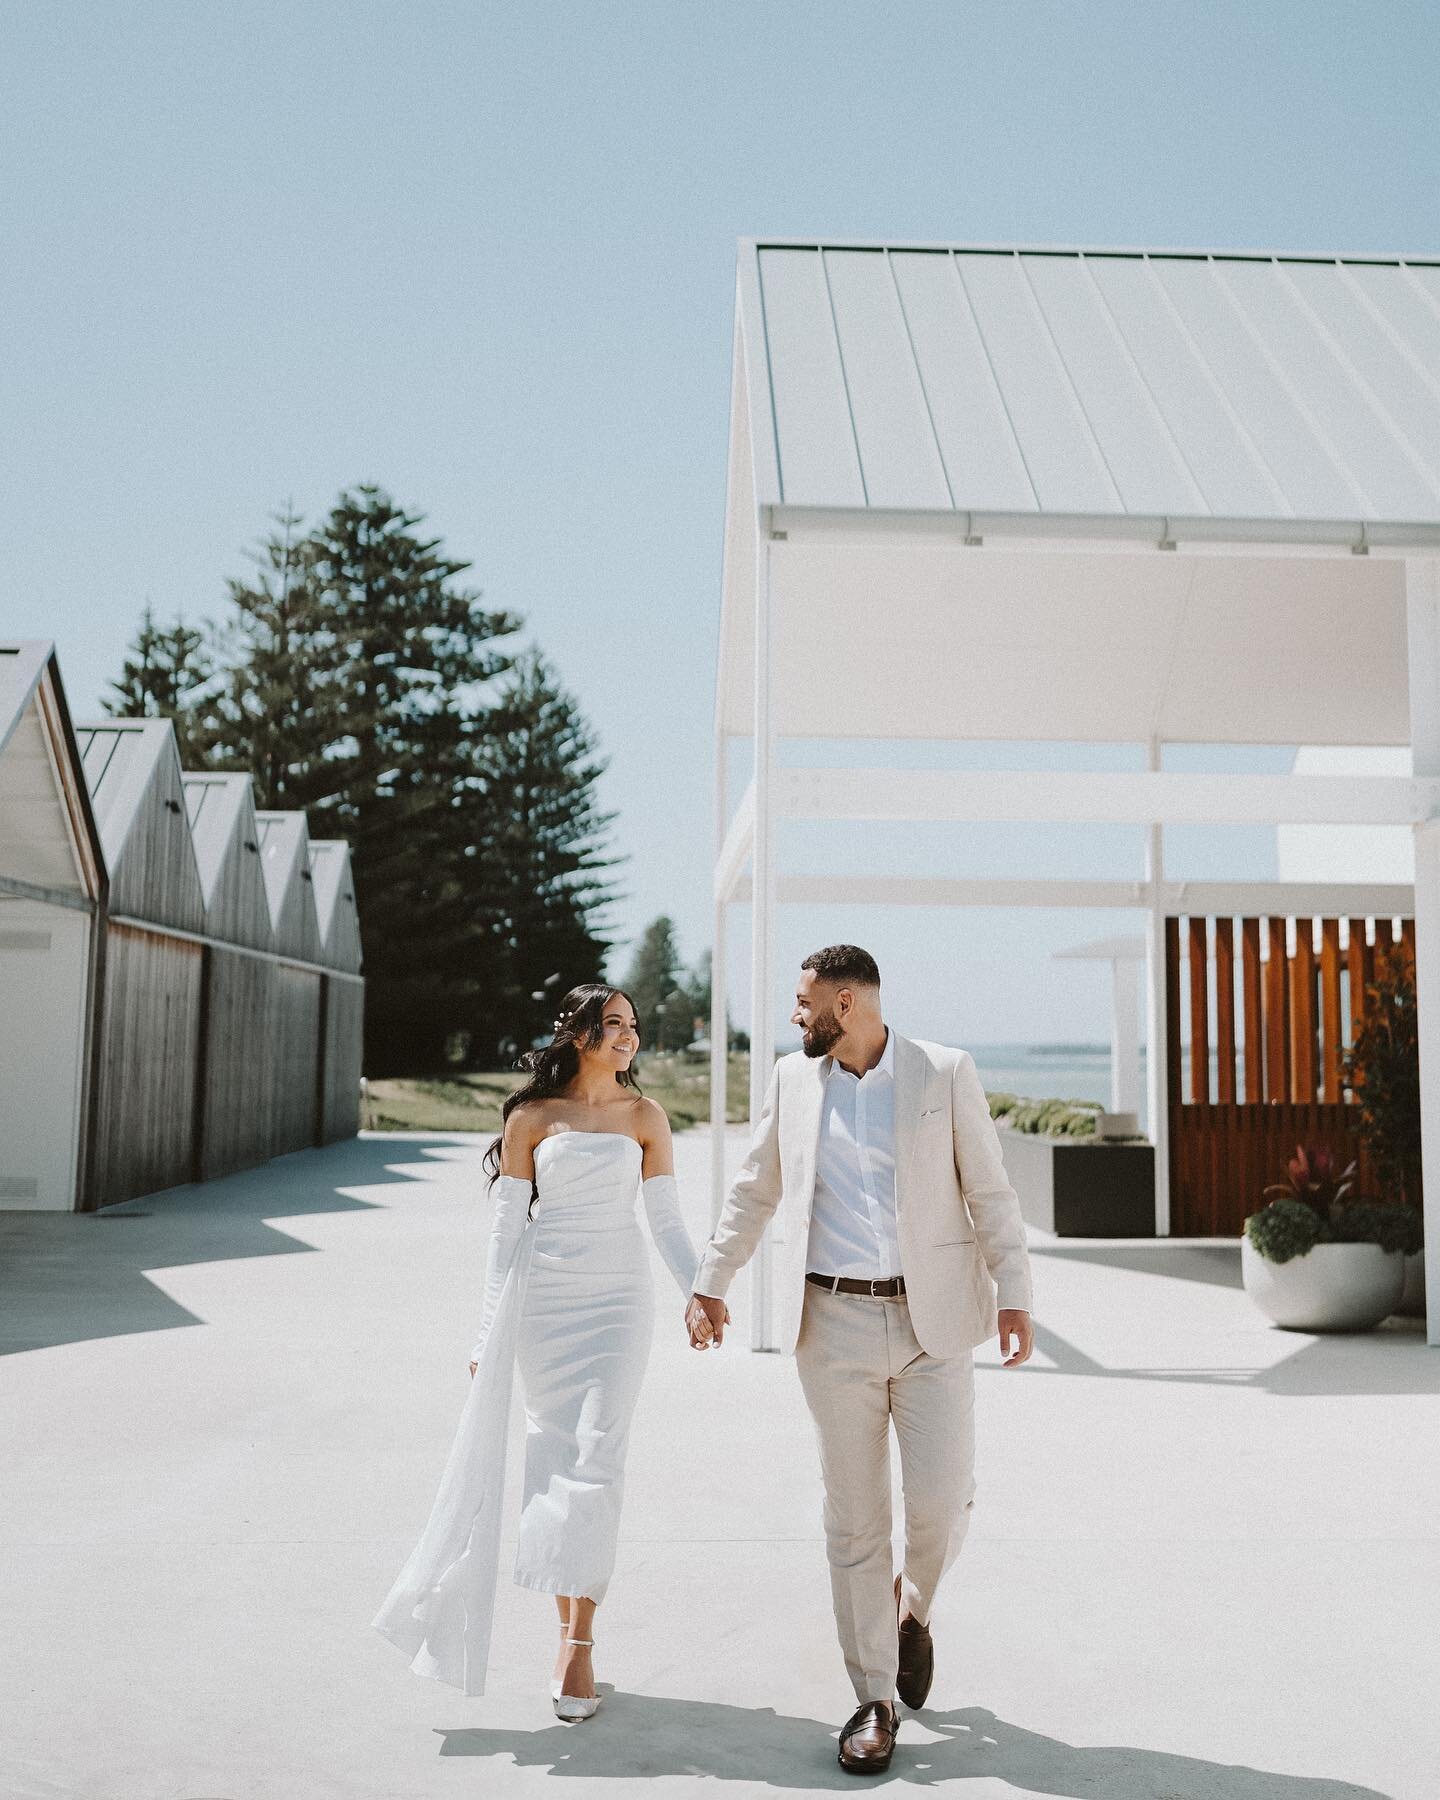 Wedded by the sea. A warm and intimate celebration for this duo.

Venue: @stgeorgesailingclub 

#sydneyweddingphotographer #sydneyweddingphotography #SydneyWedding
#SydneyWeddings #WeddingPlanner
#SydneyWeddingVenue #SydneyEventPlanner #luxurywedding